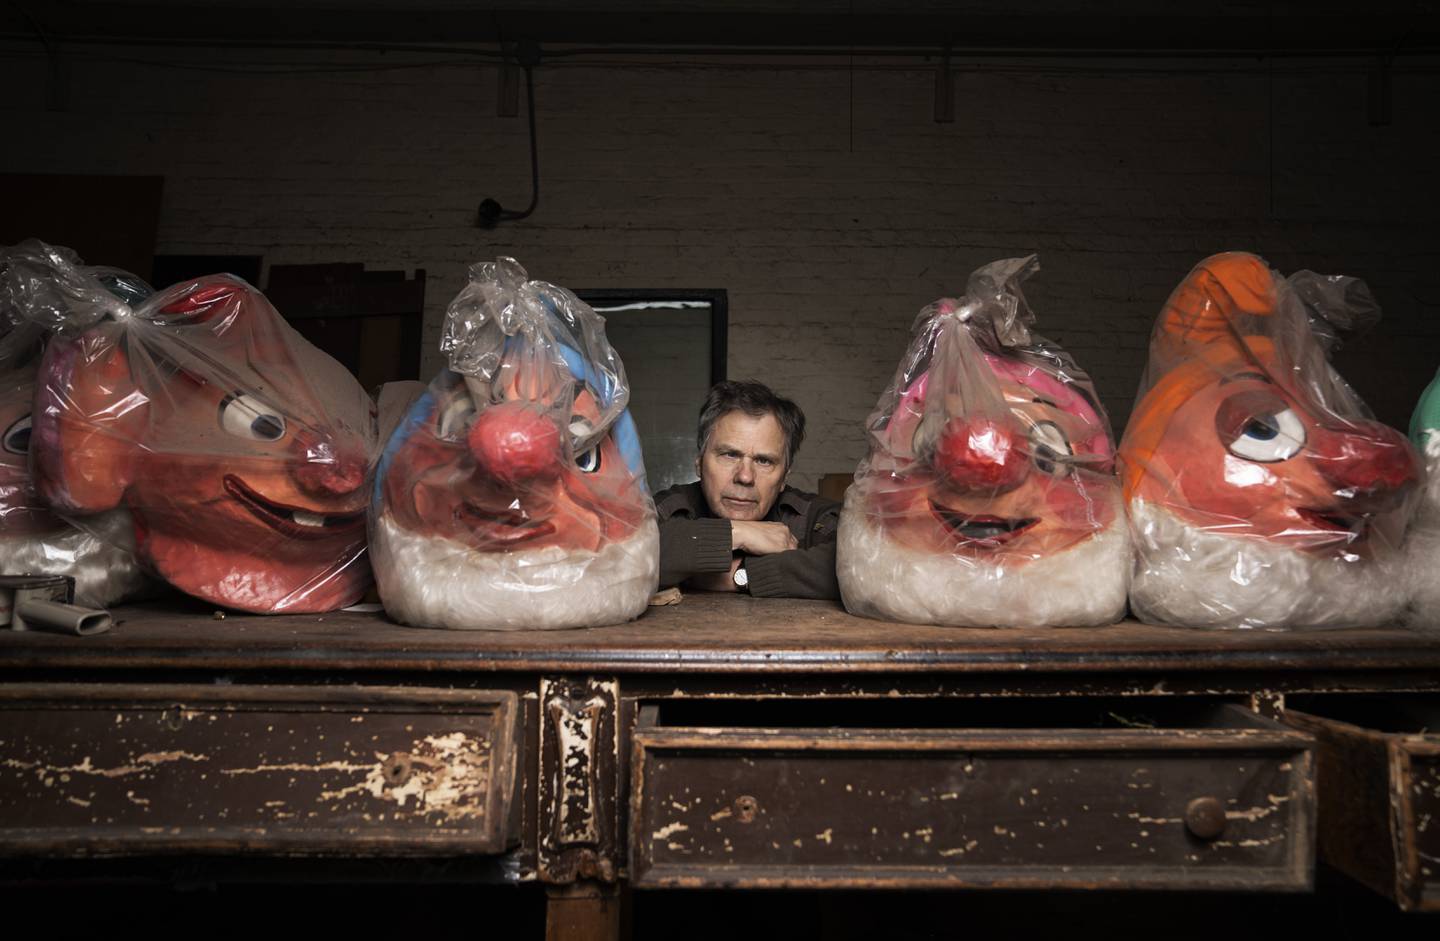 Rick Goebel is flanked by two papier-mâché heads of the dwarves from "Snow White."